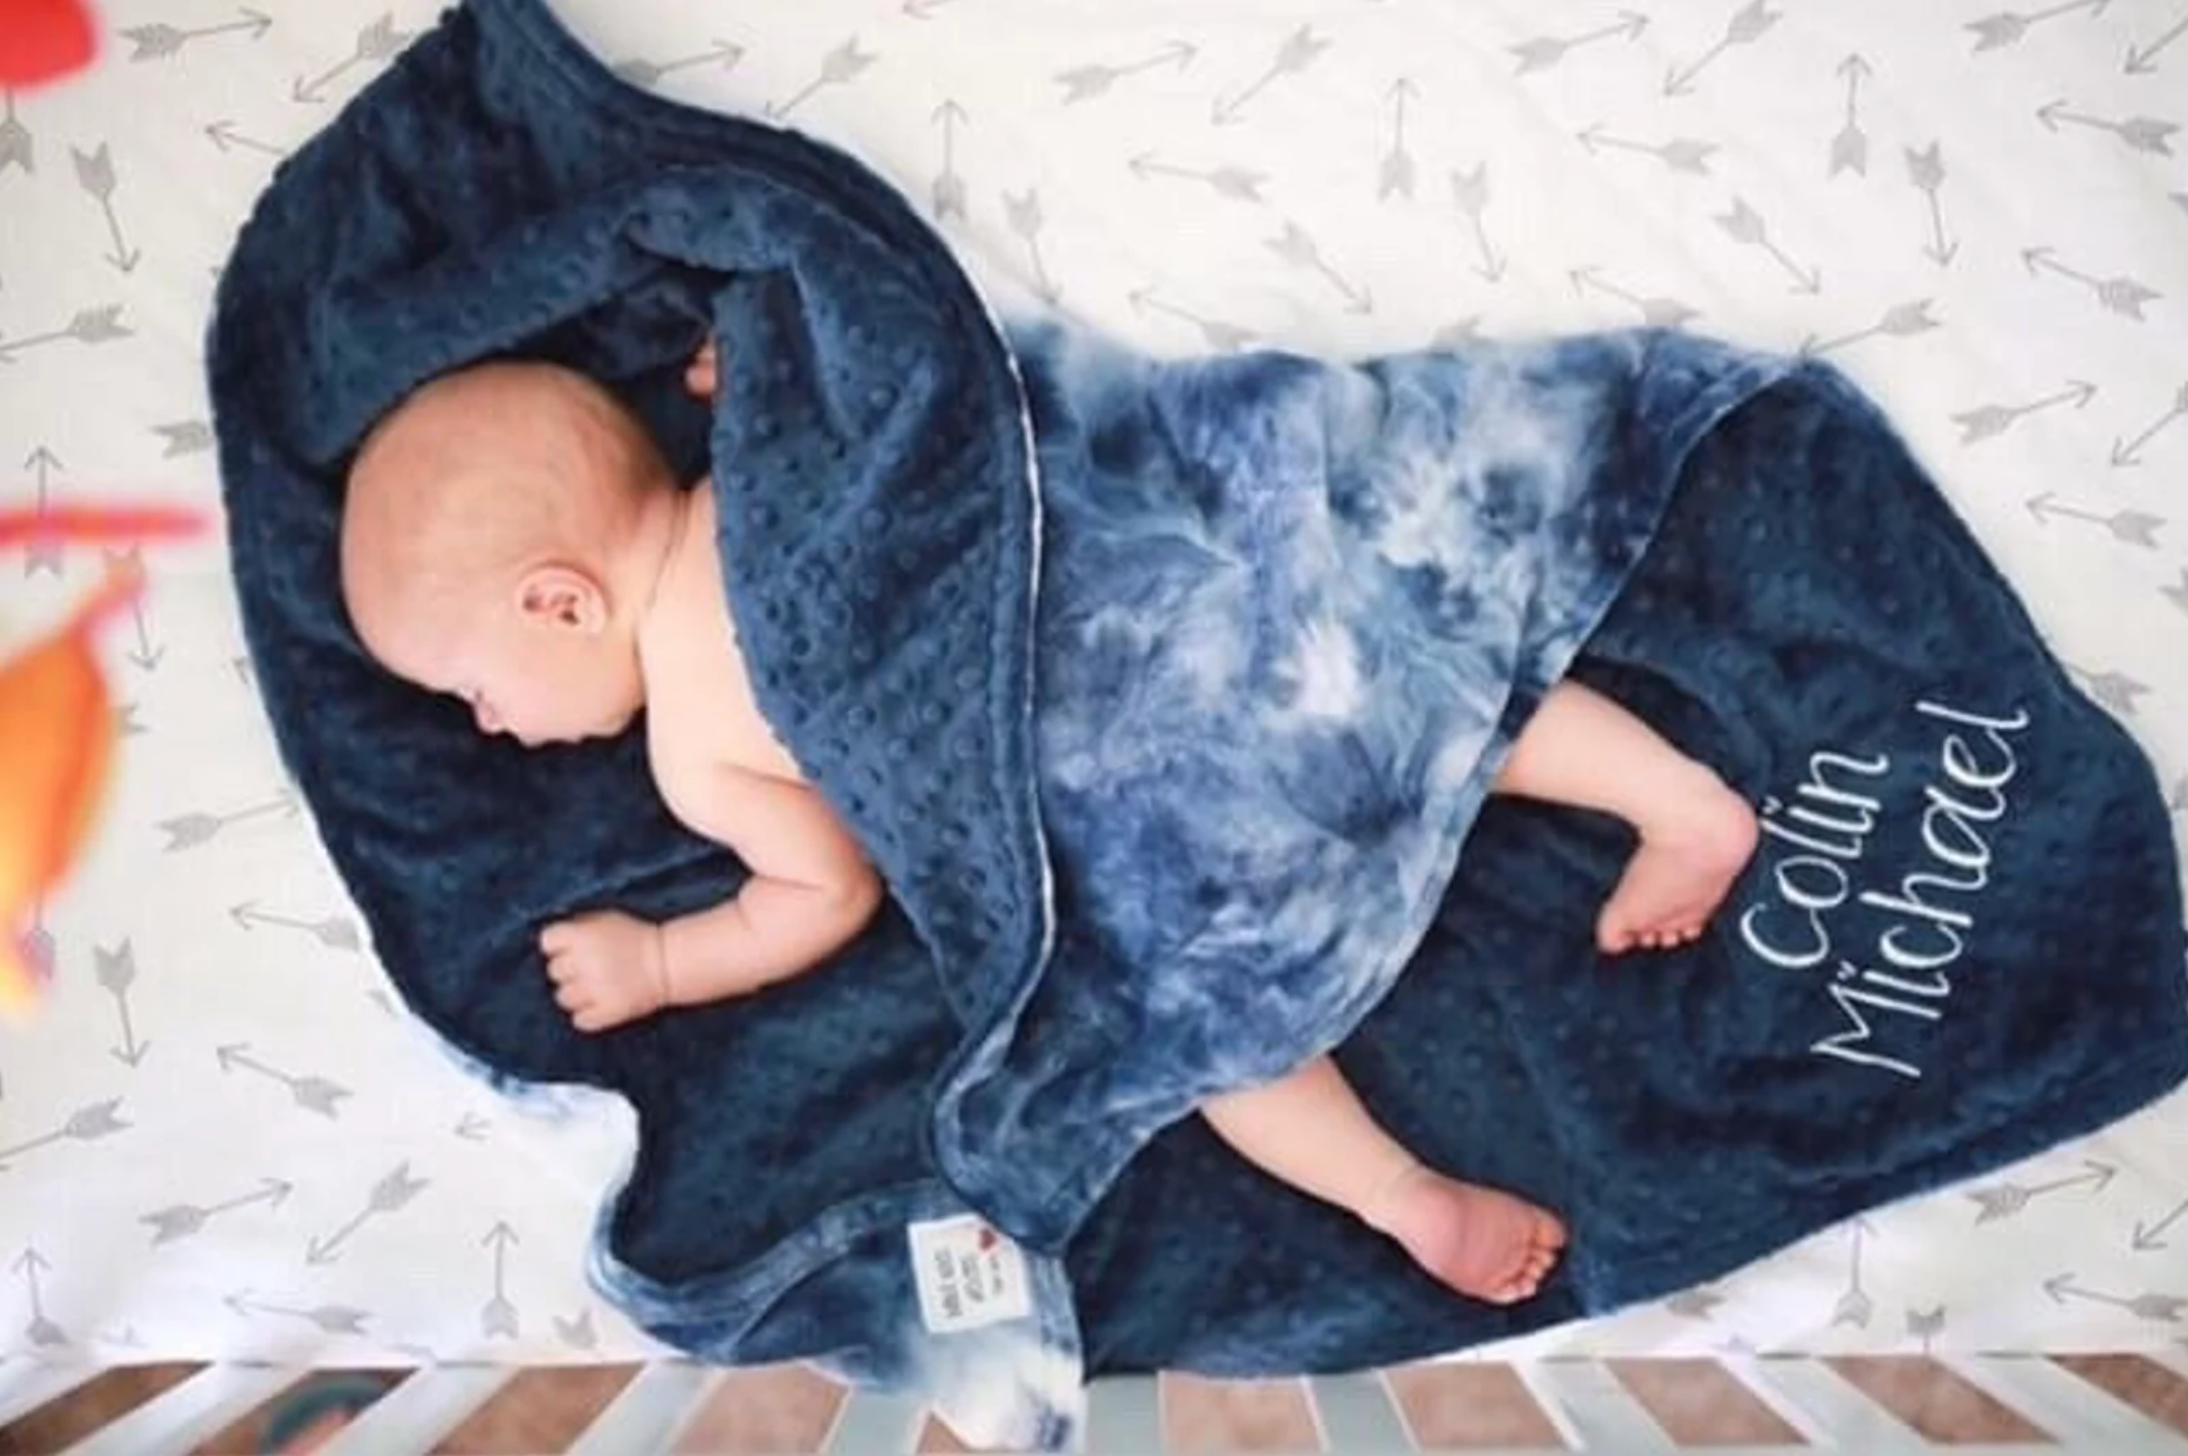 Model wrapped in navy blue and white tie dye blanket with 